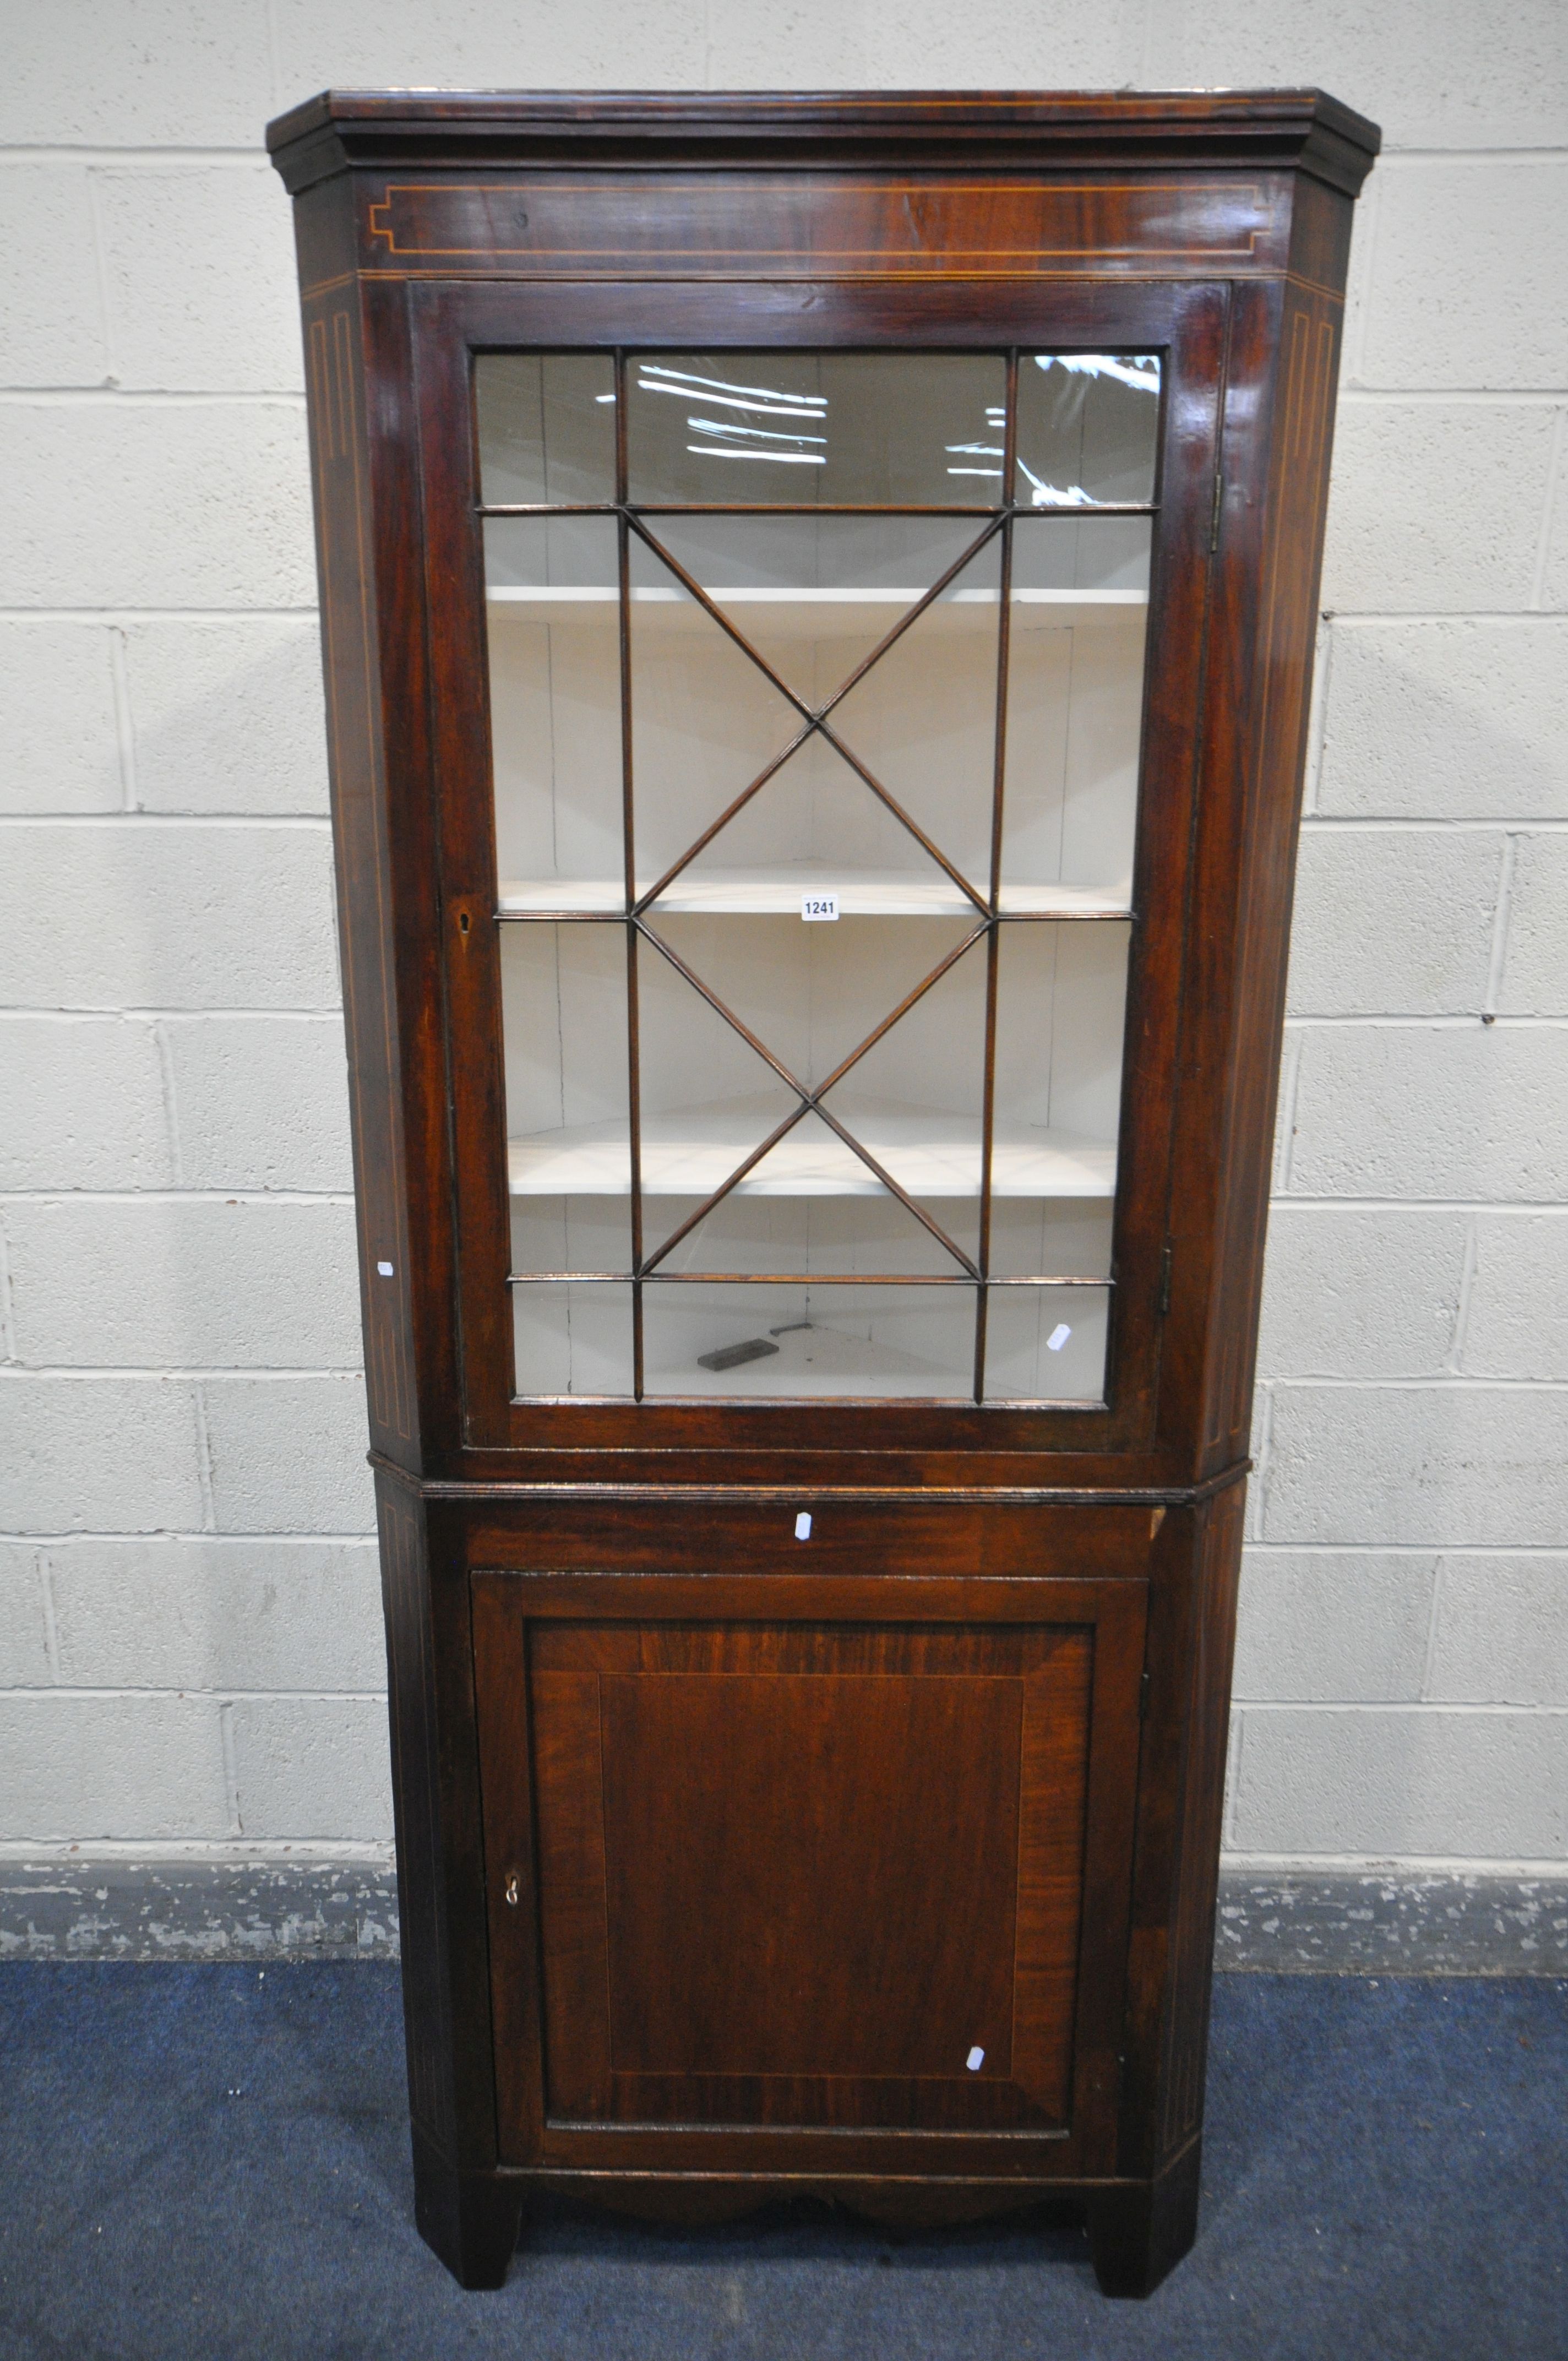 A GEORGIAN MAHOGANY AND INLAID CORNER CUPBOARD, the top section with a single astragal glazed door